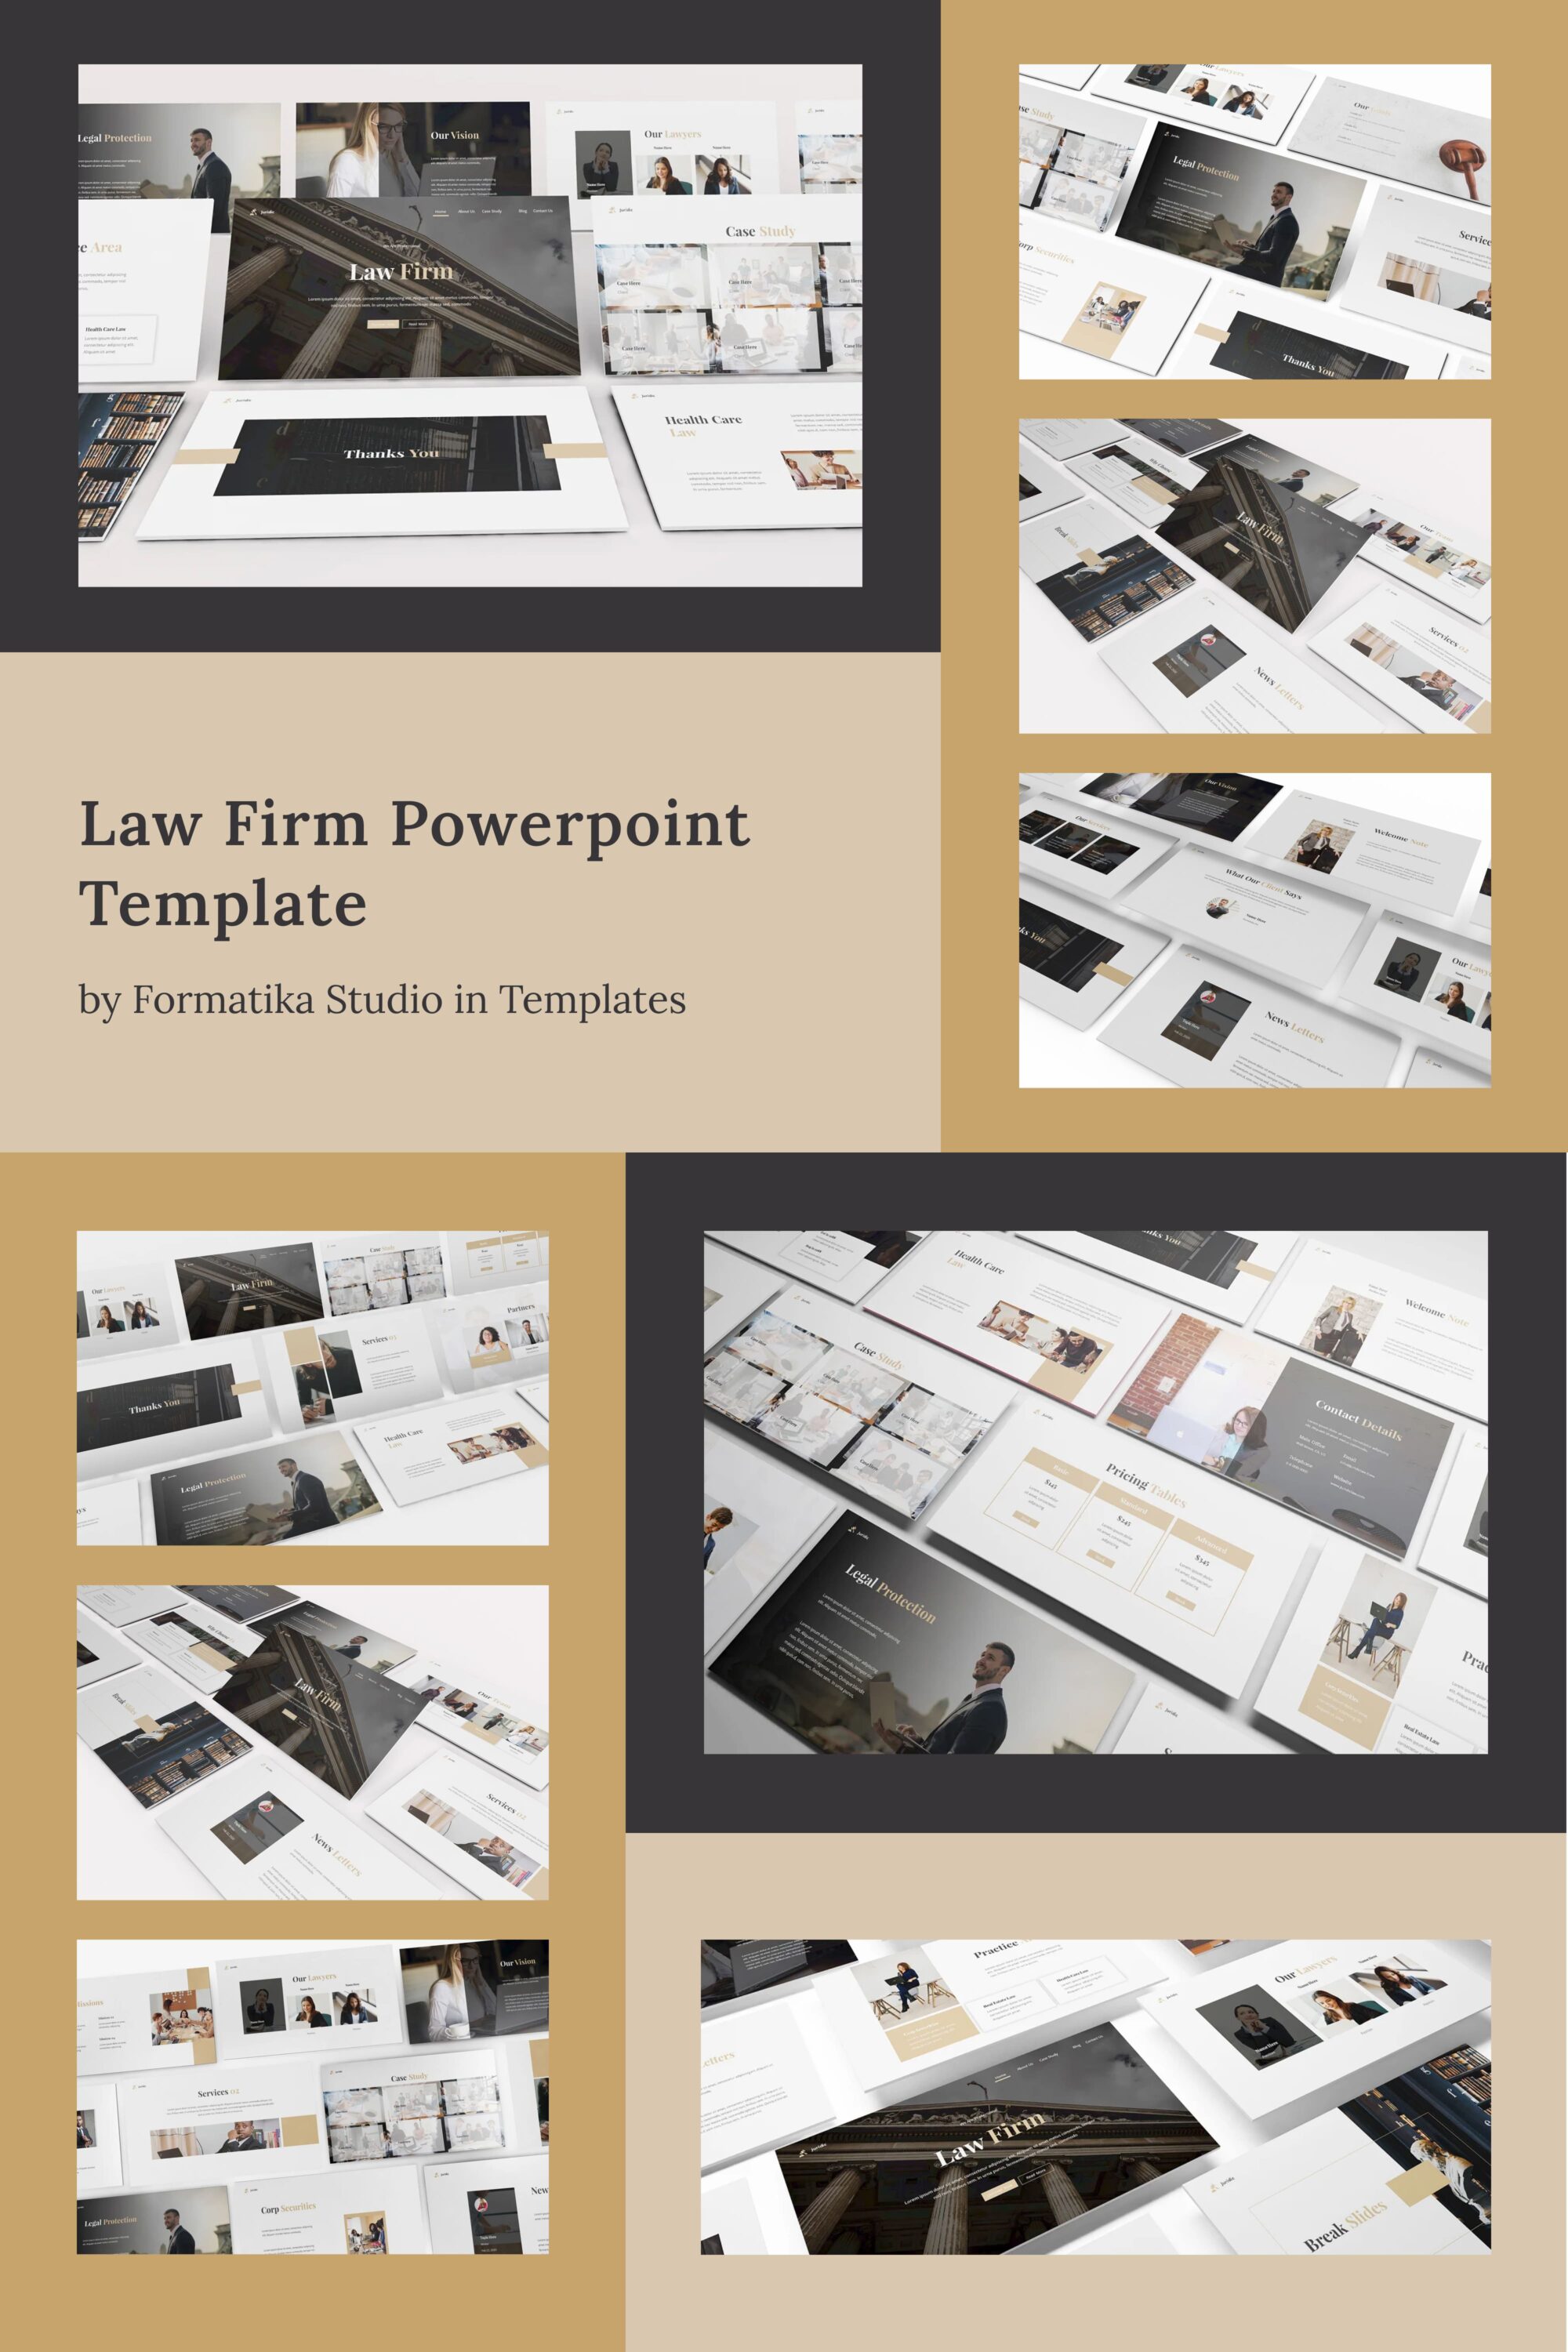 law firm powerpoint template 04.